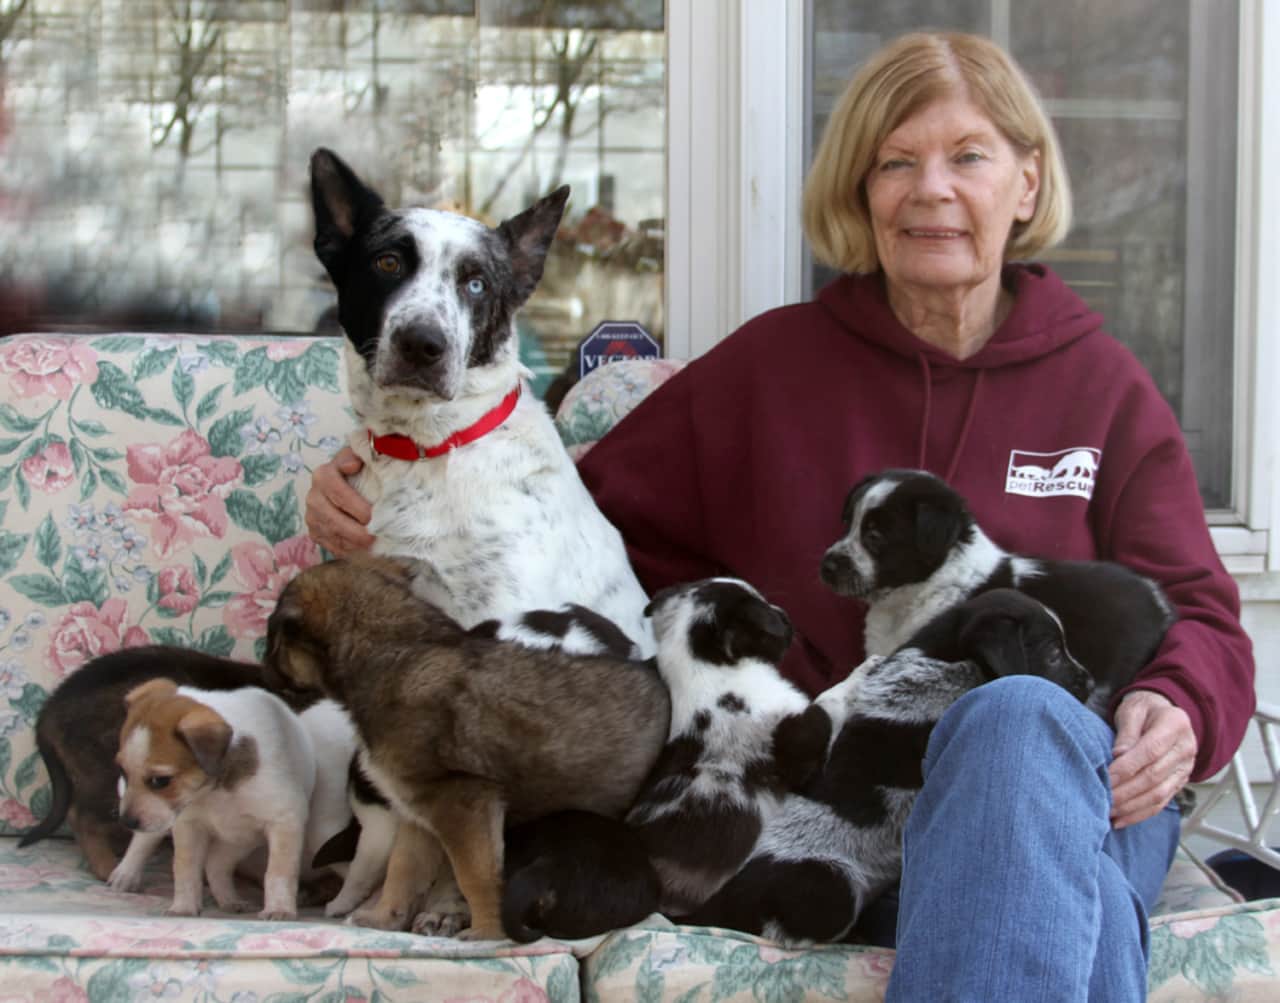 The Town of Mount Pleasant recently enacted a local law banning "puppy mills" within the town. Prospective cat and dog owners can turn to licensed breeders or shelters like Harrison's Pet Rescue for new pets.